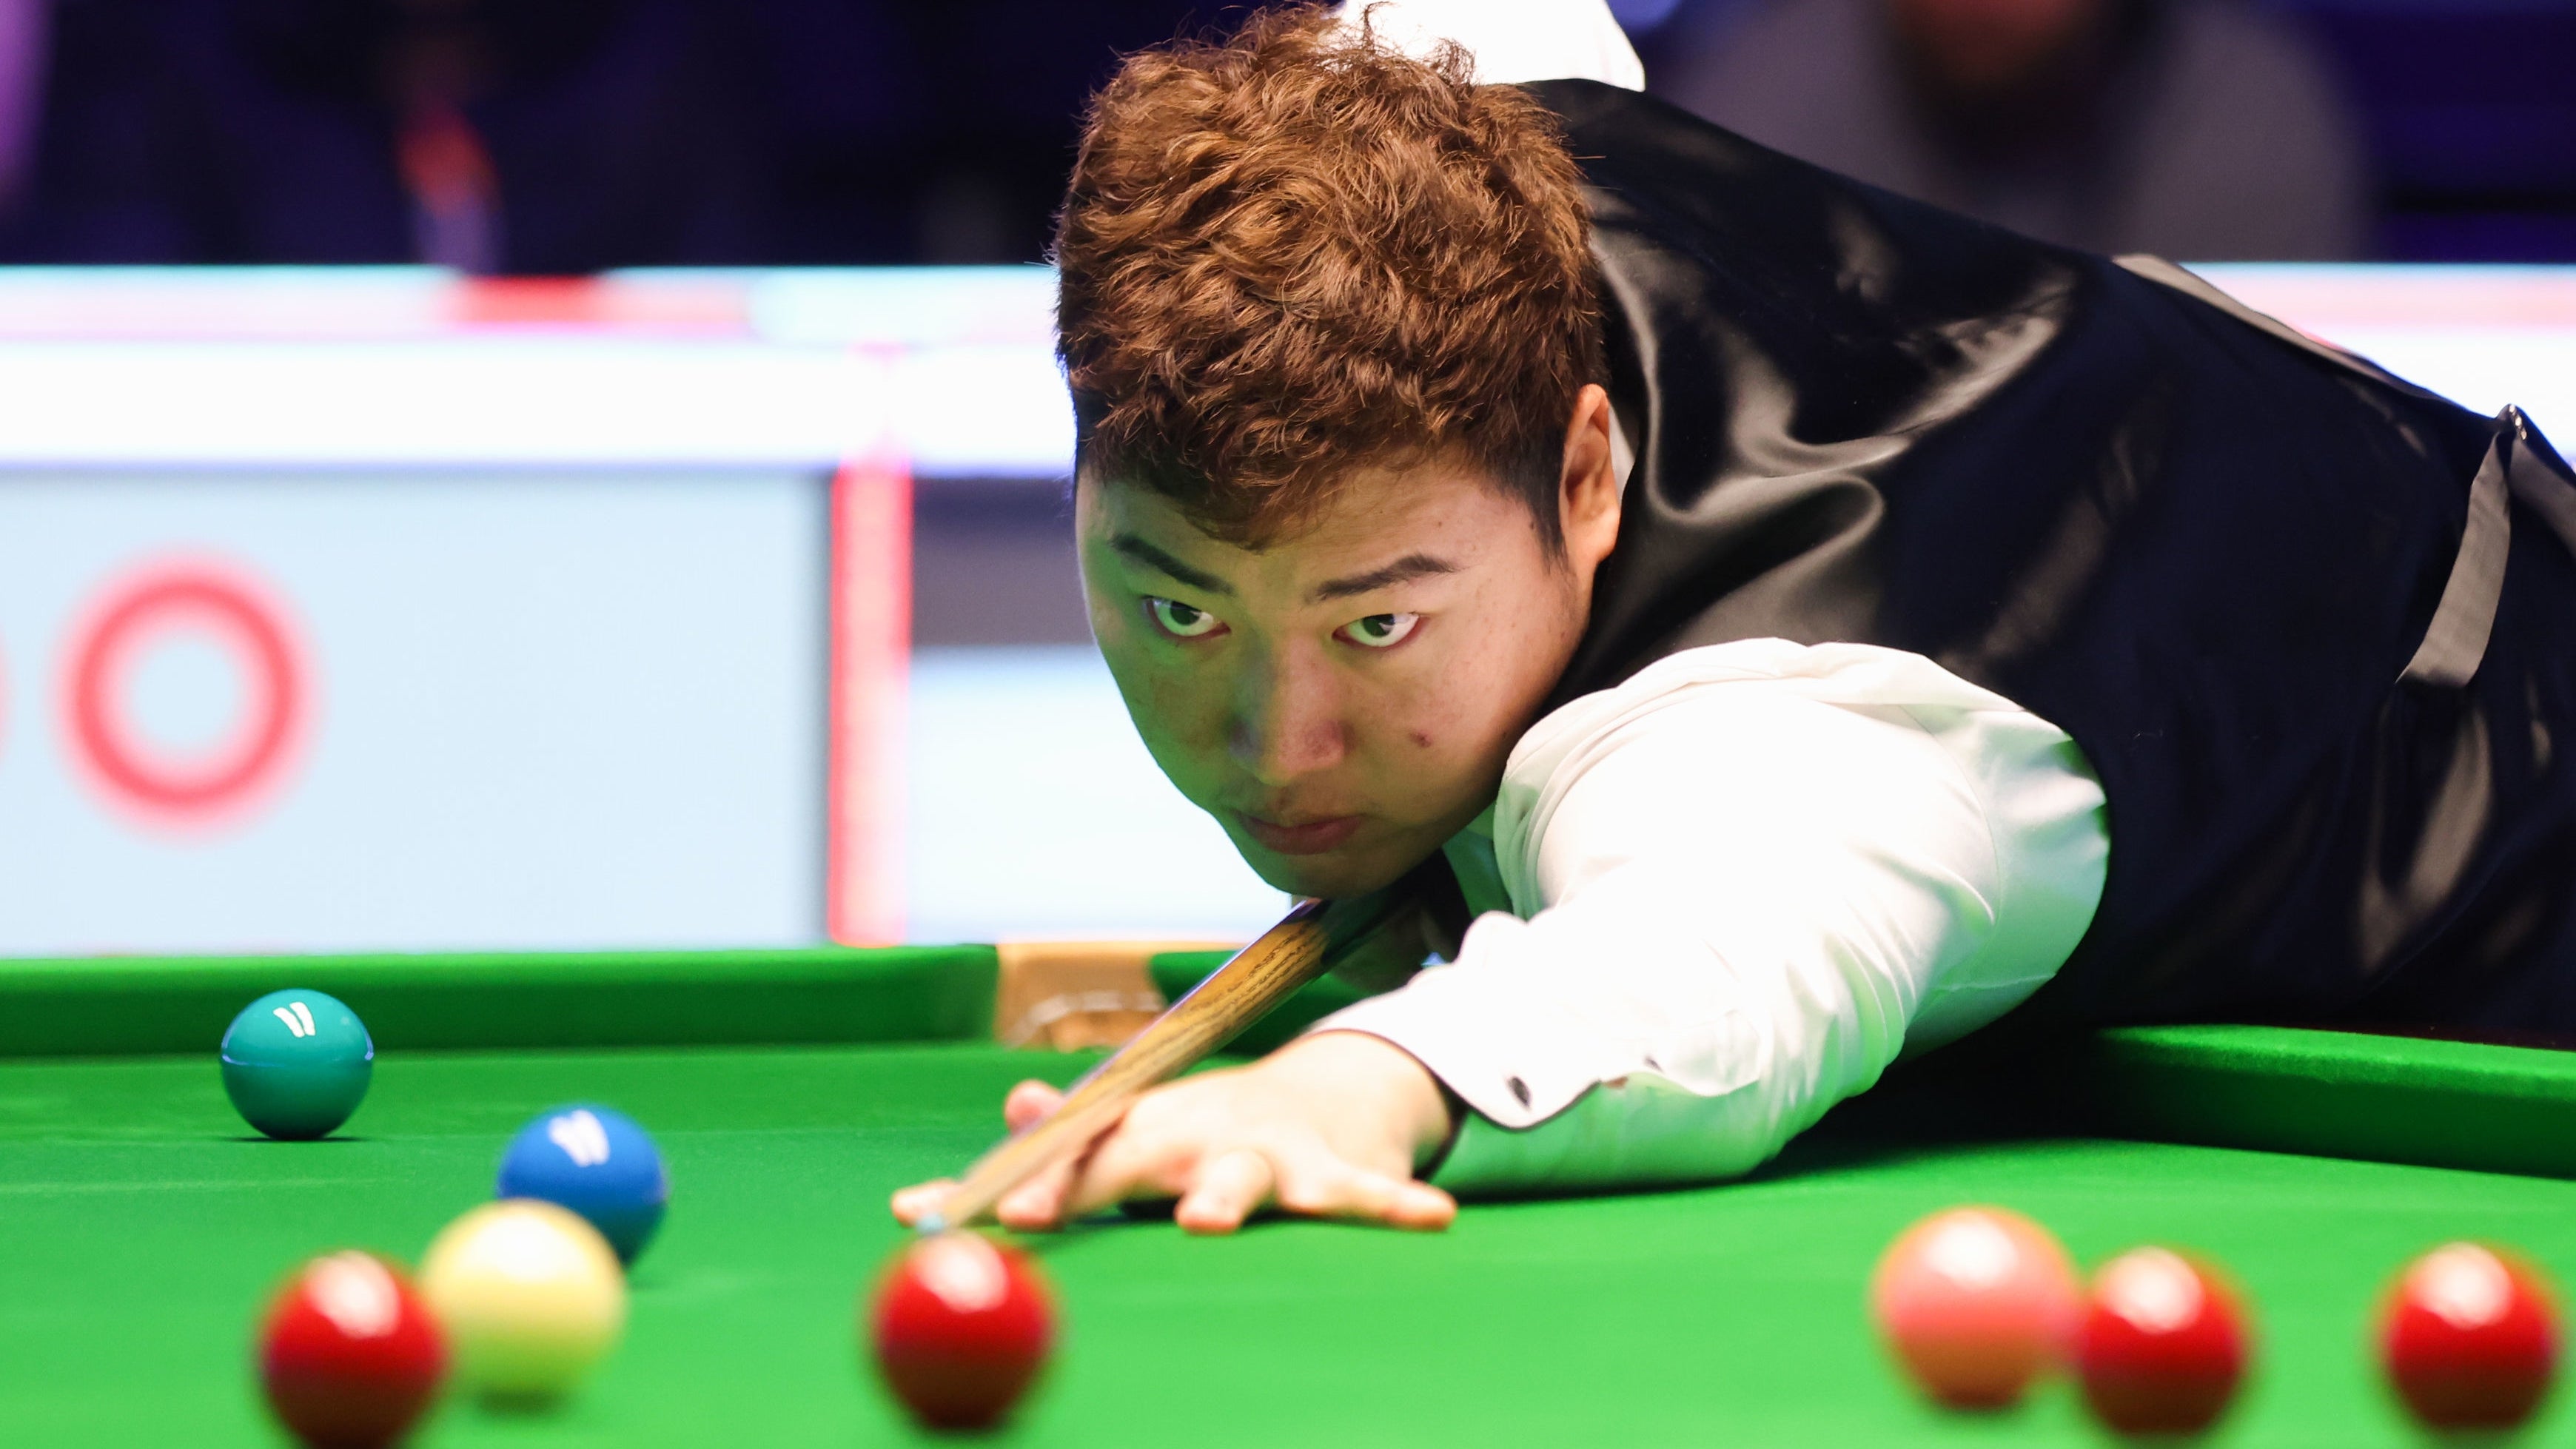 Snooker charges 10 Chinese players in match-fixing scandal including Masters champion Yan Bingtao The Independent